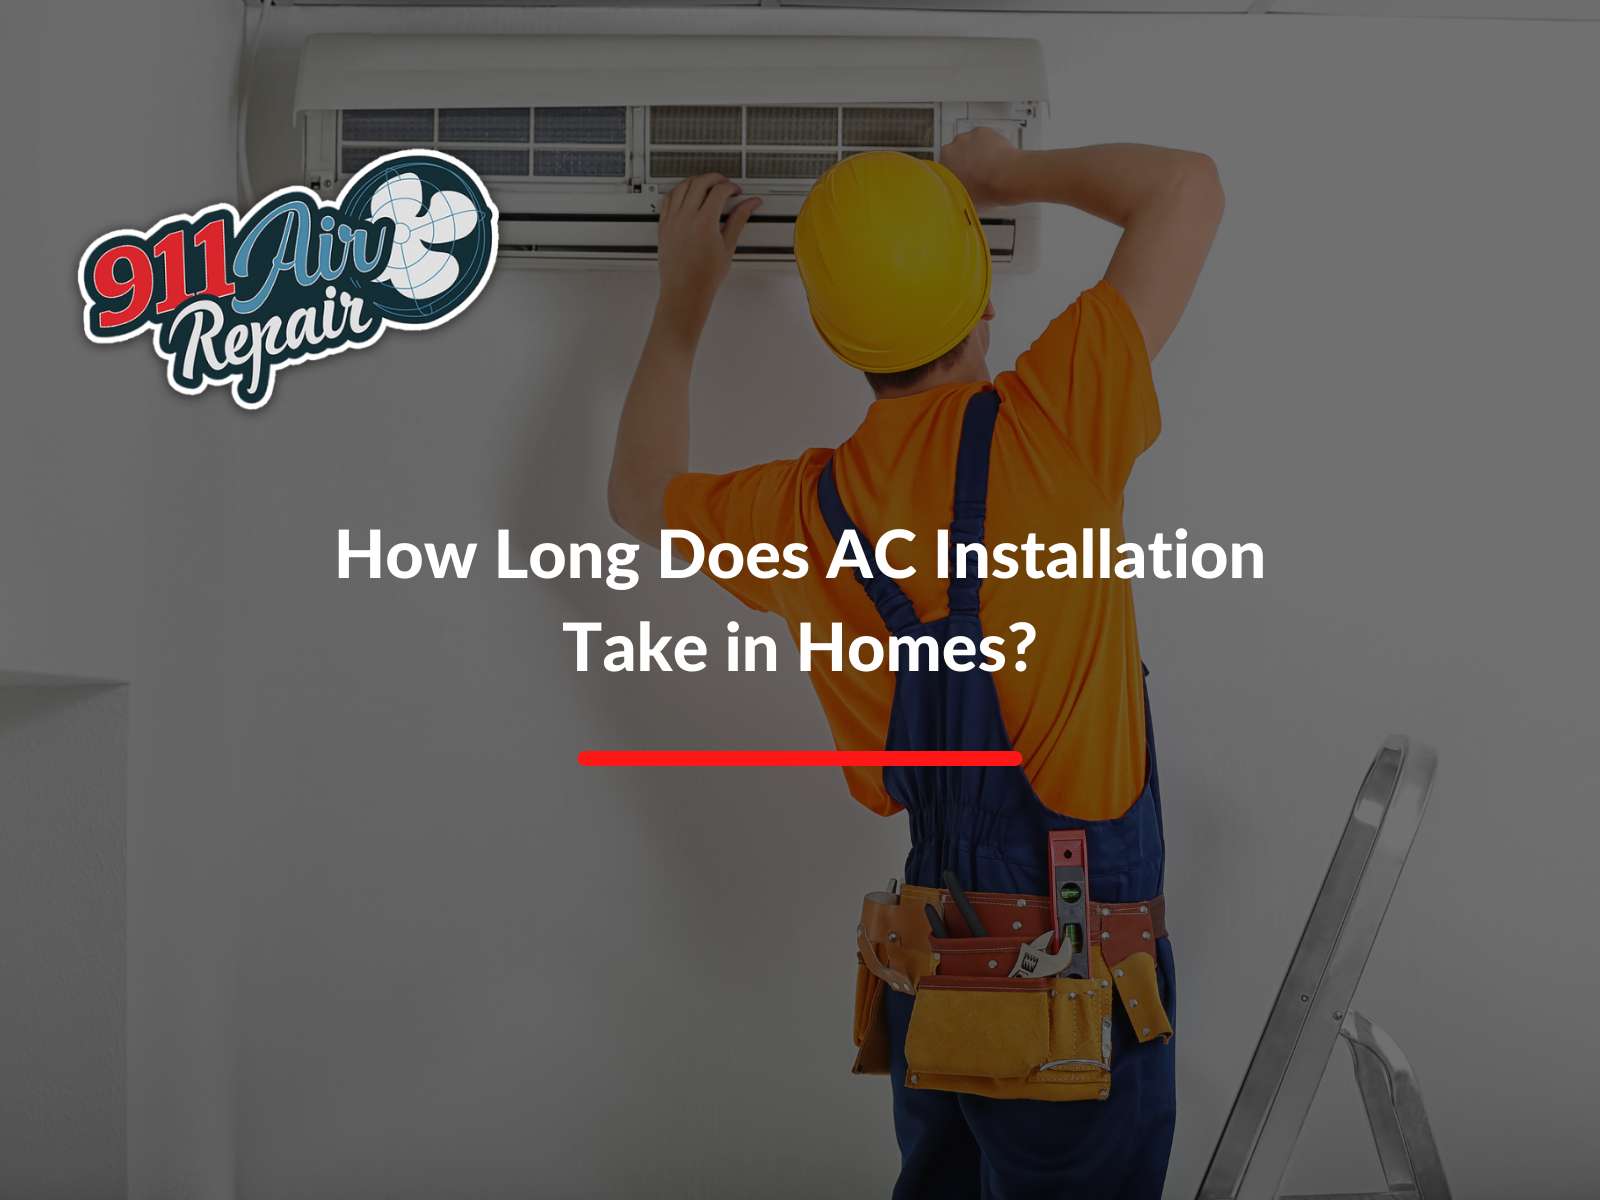 How Long Does AC Installation Take in Homes